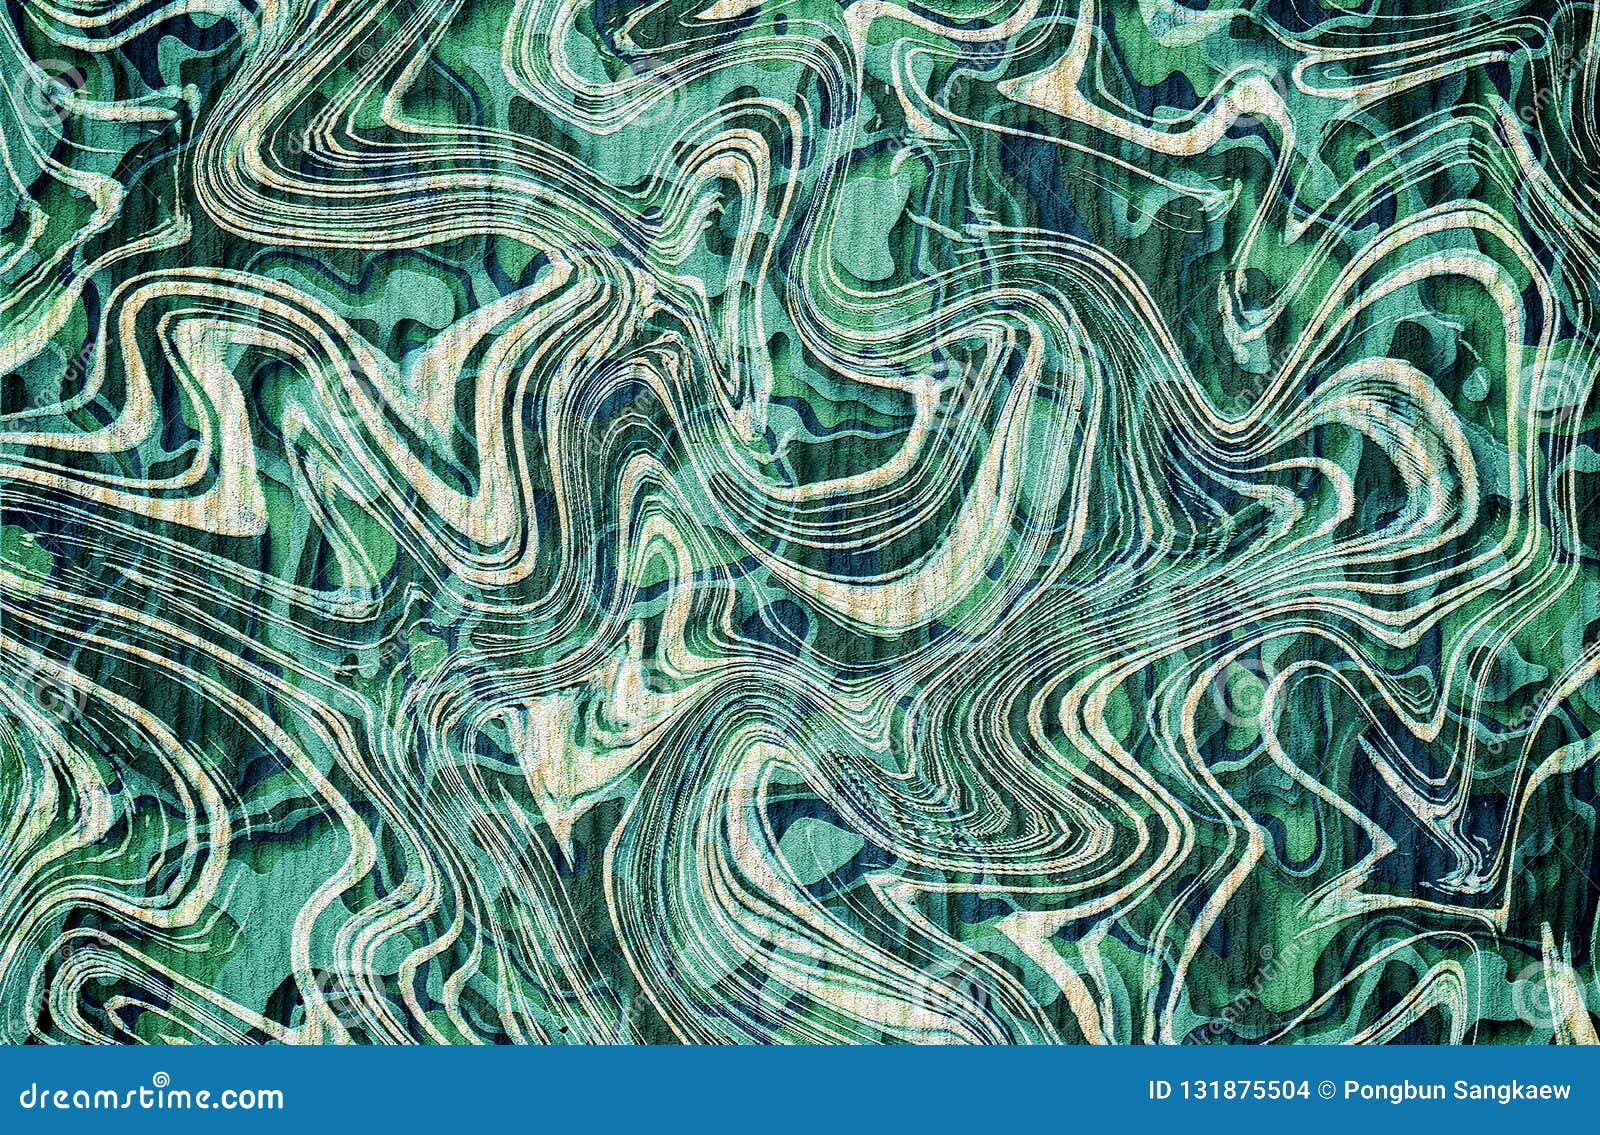 Green,blue And White Marble Effect Seamless Wood Pattern Stock Photo Image of beautiful, paper